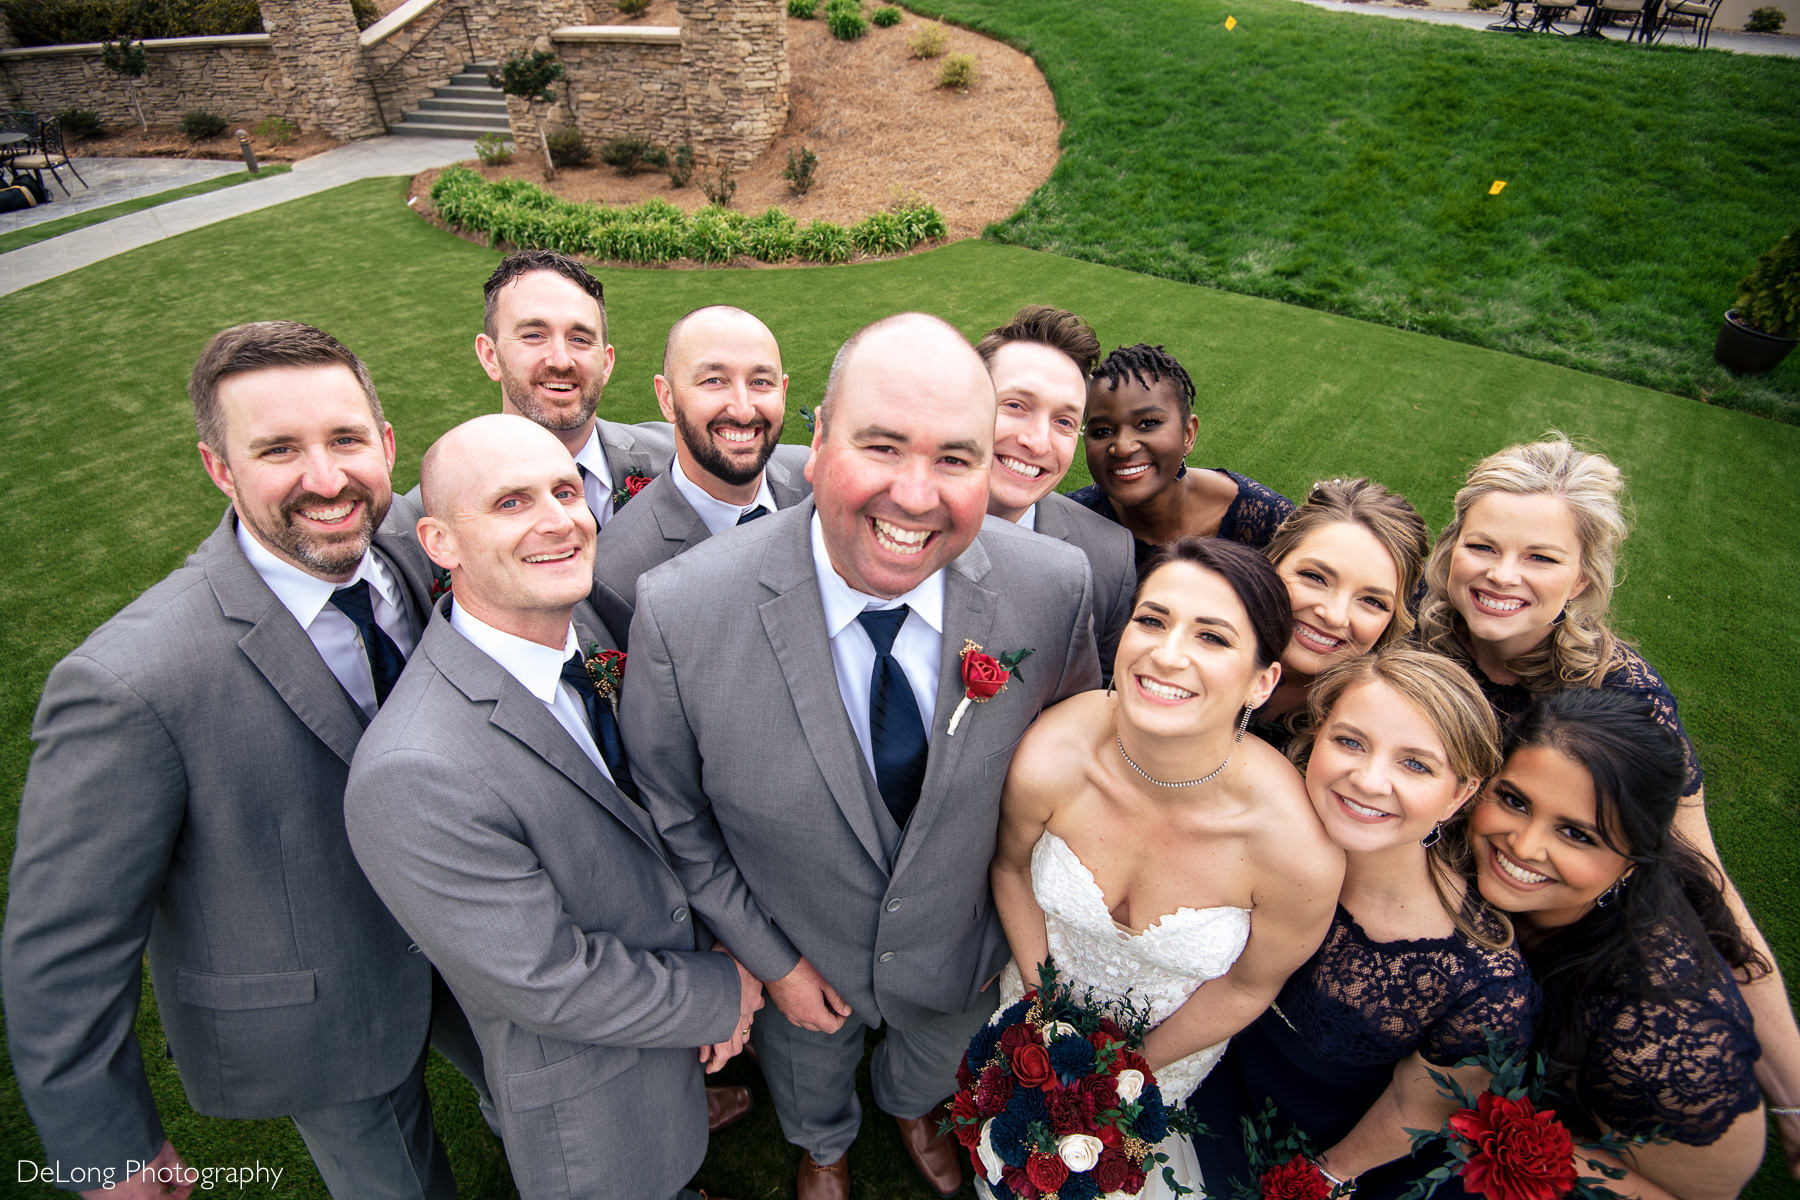 Top down view wedding party portrait at Childress Vineyards by Charlotte Wedding Photographers DeLong Photography